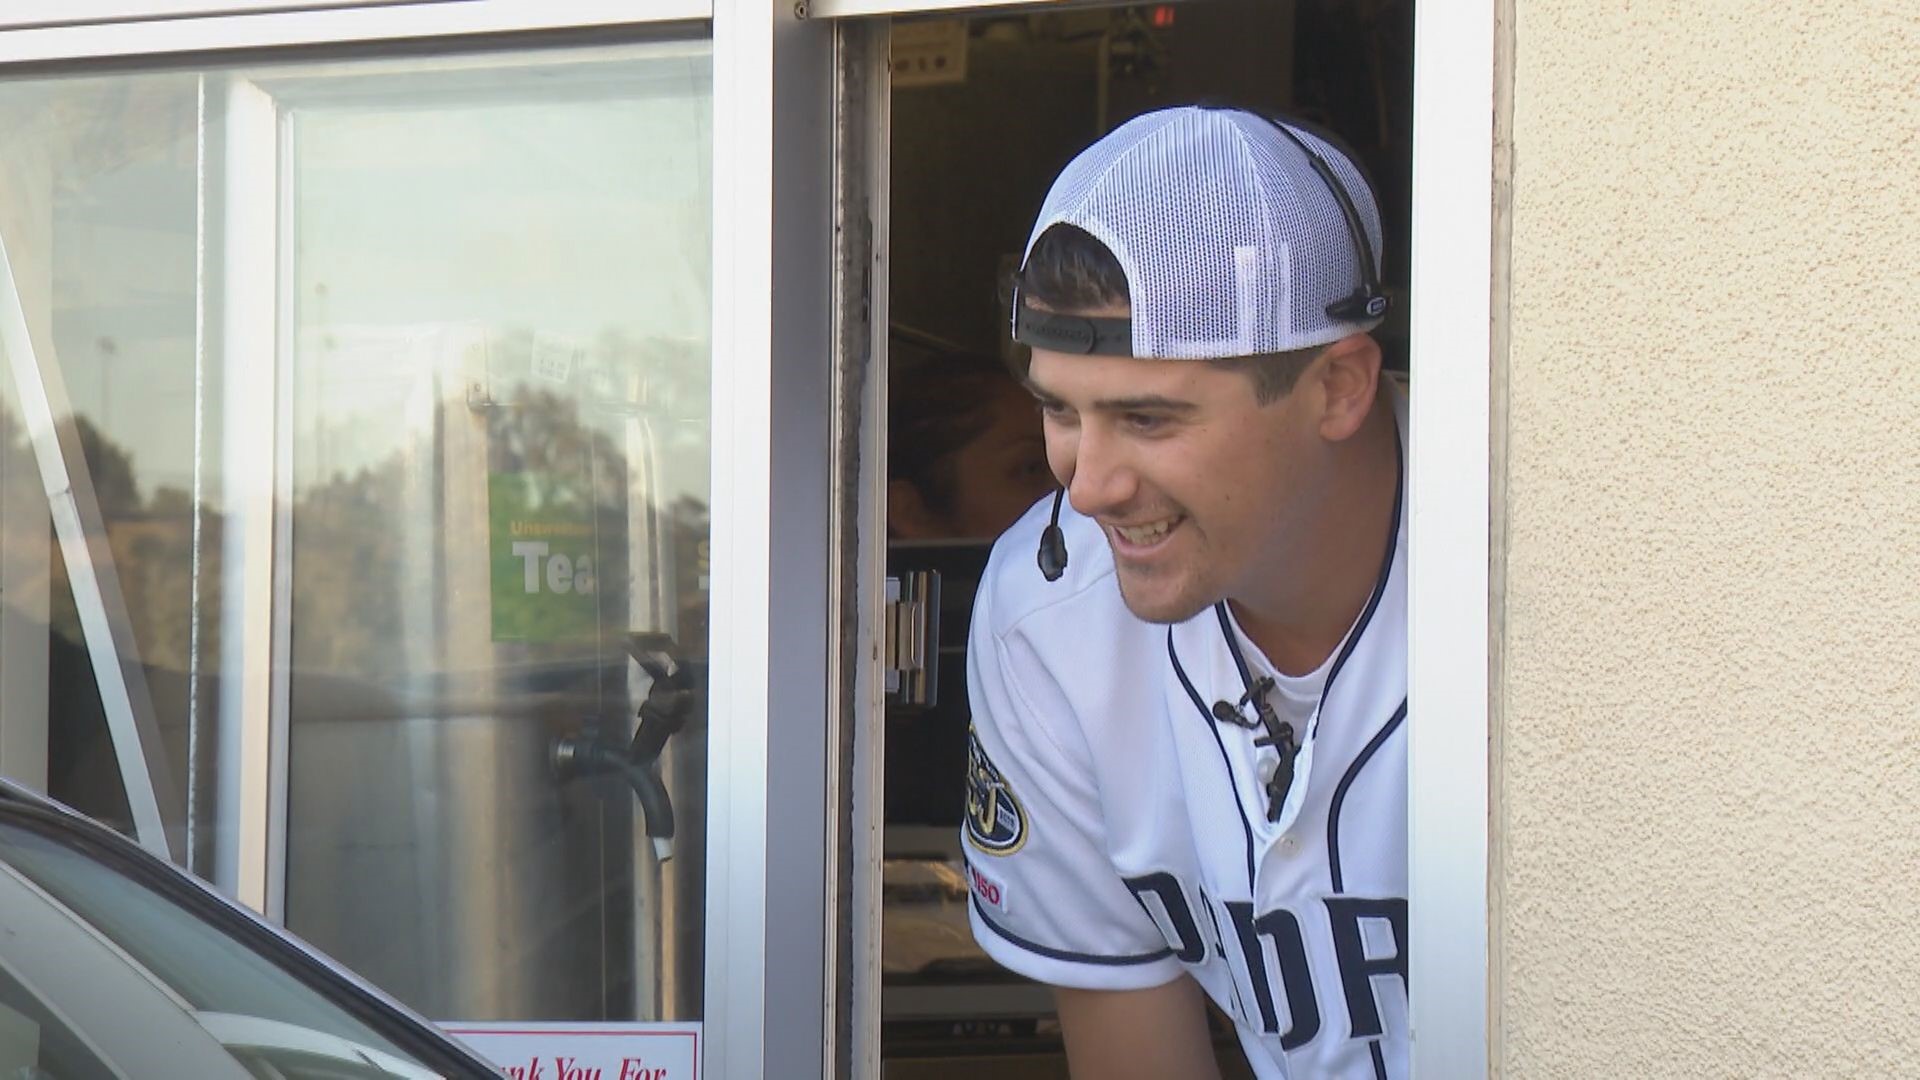 Quantrill greeted fans and served breakfast as part of McDonalds effort to create feel good moments.